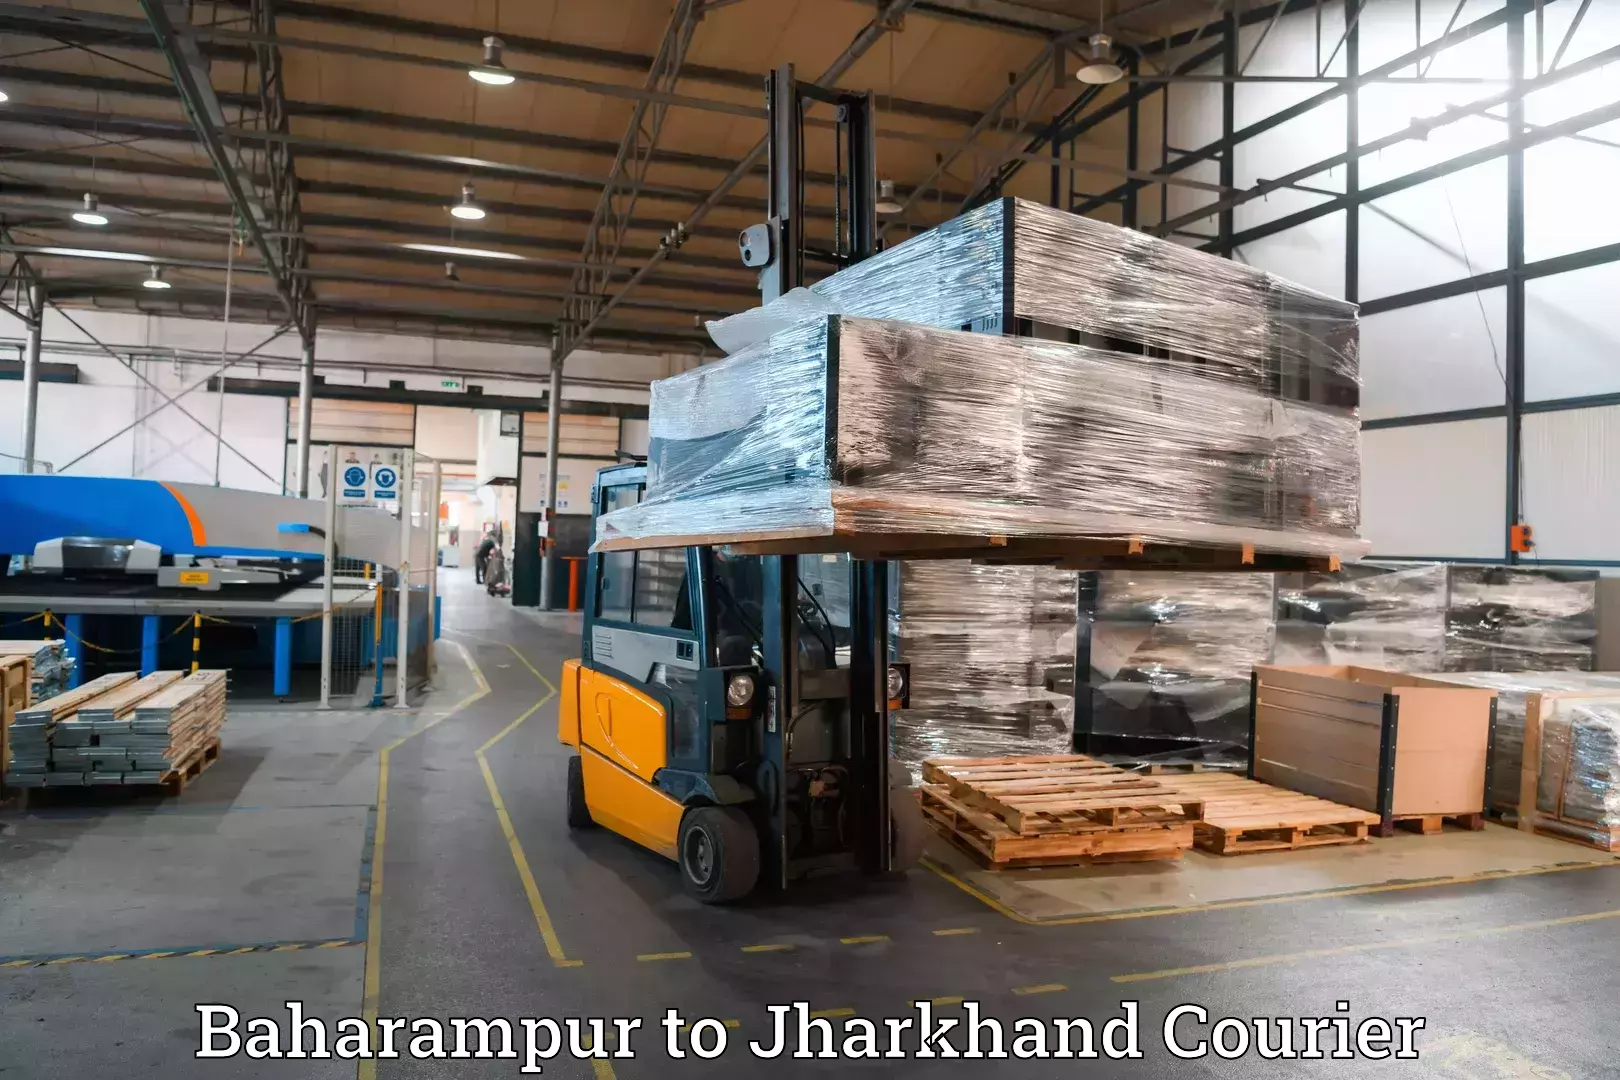 Luggage transport company Baharampur to Jharkhand